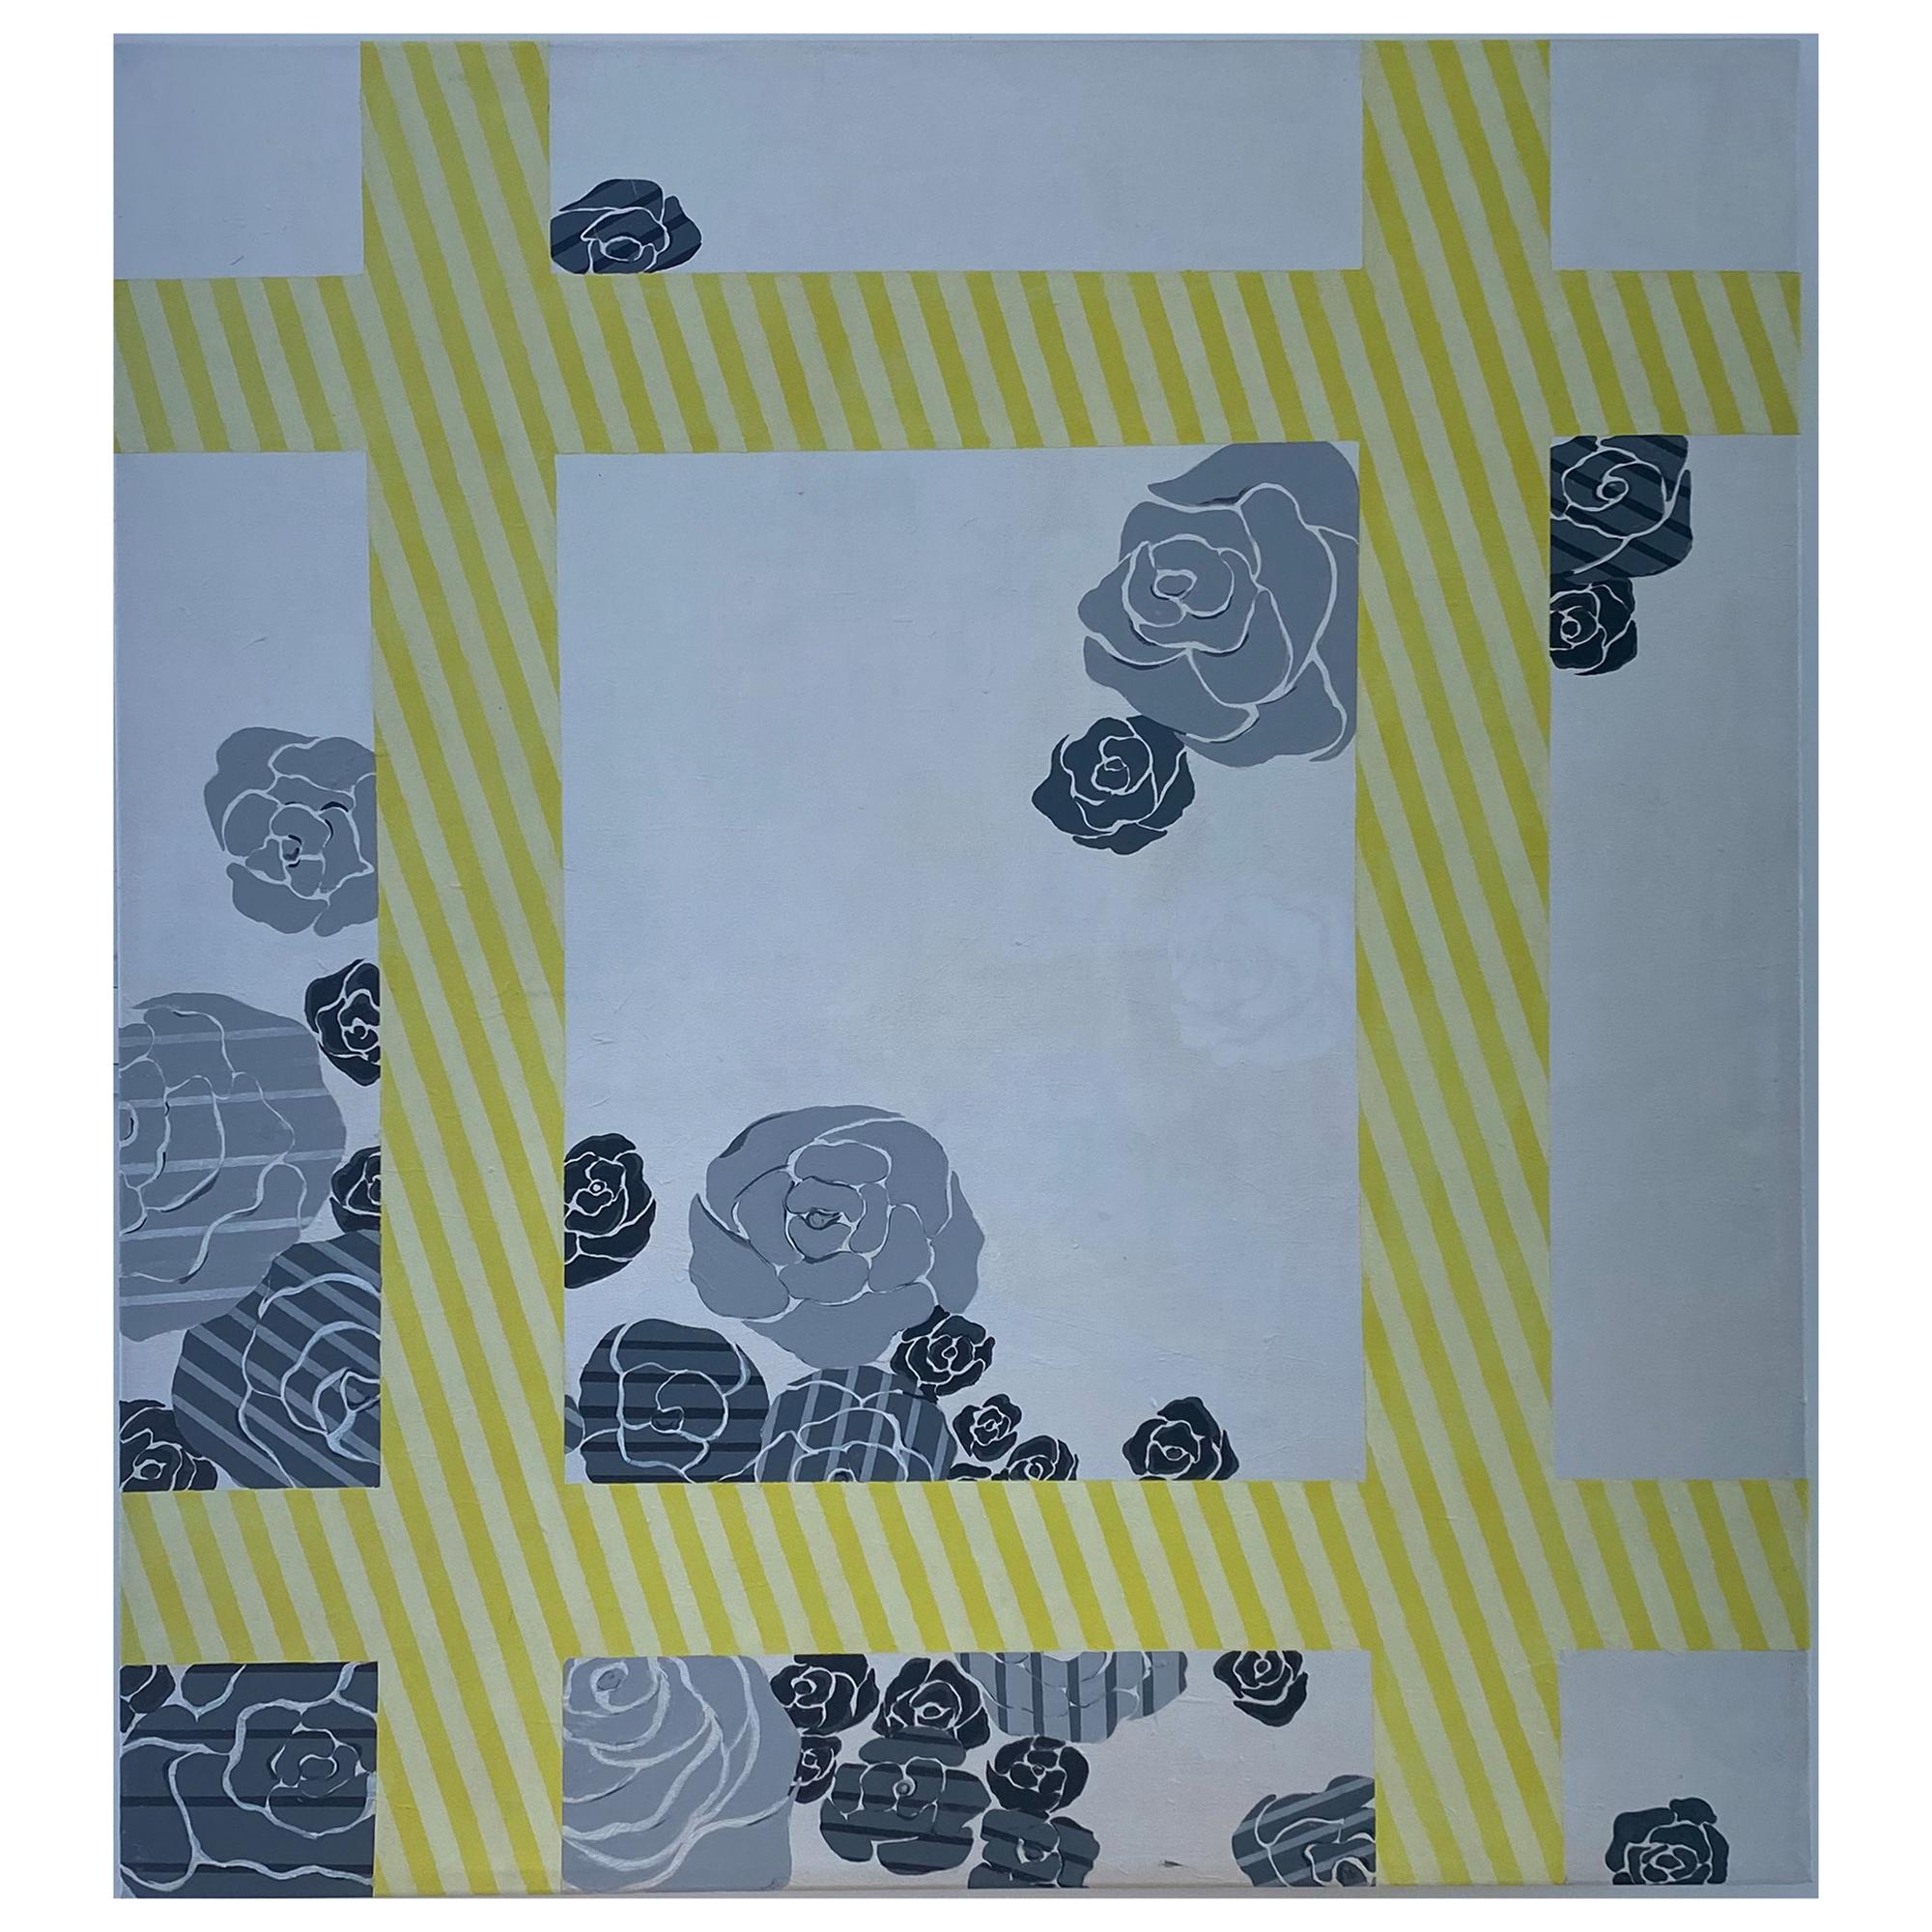  Painting "White Flower" 2014  Modern Yellow Black Grey by Cecilia Setterdahl